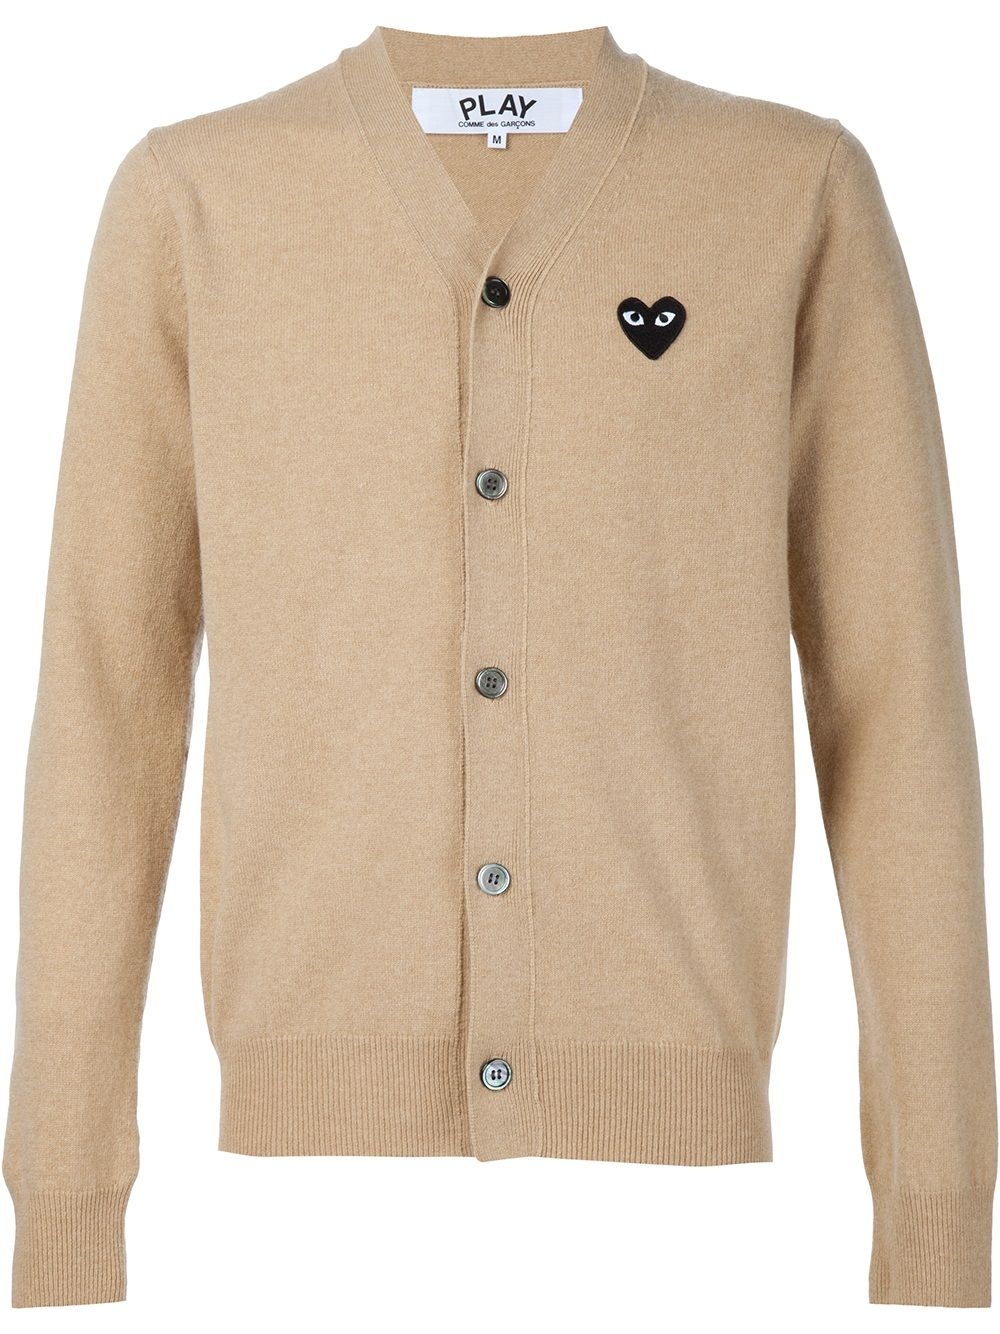 embroidered heart cardigan - 1